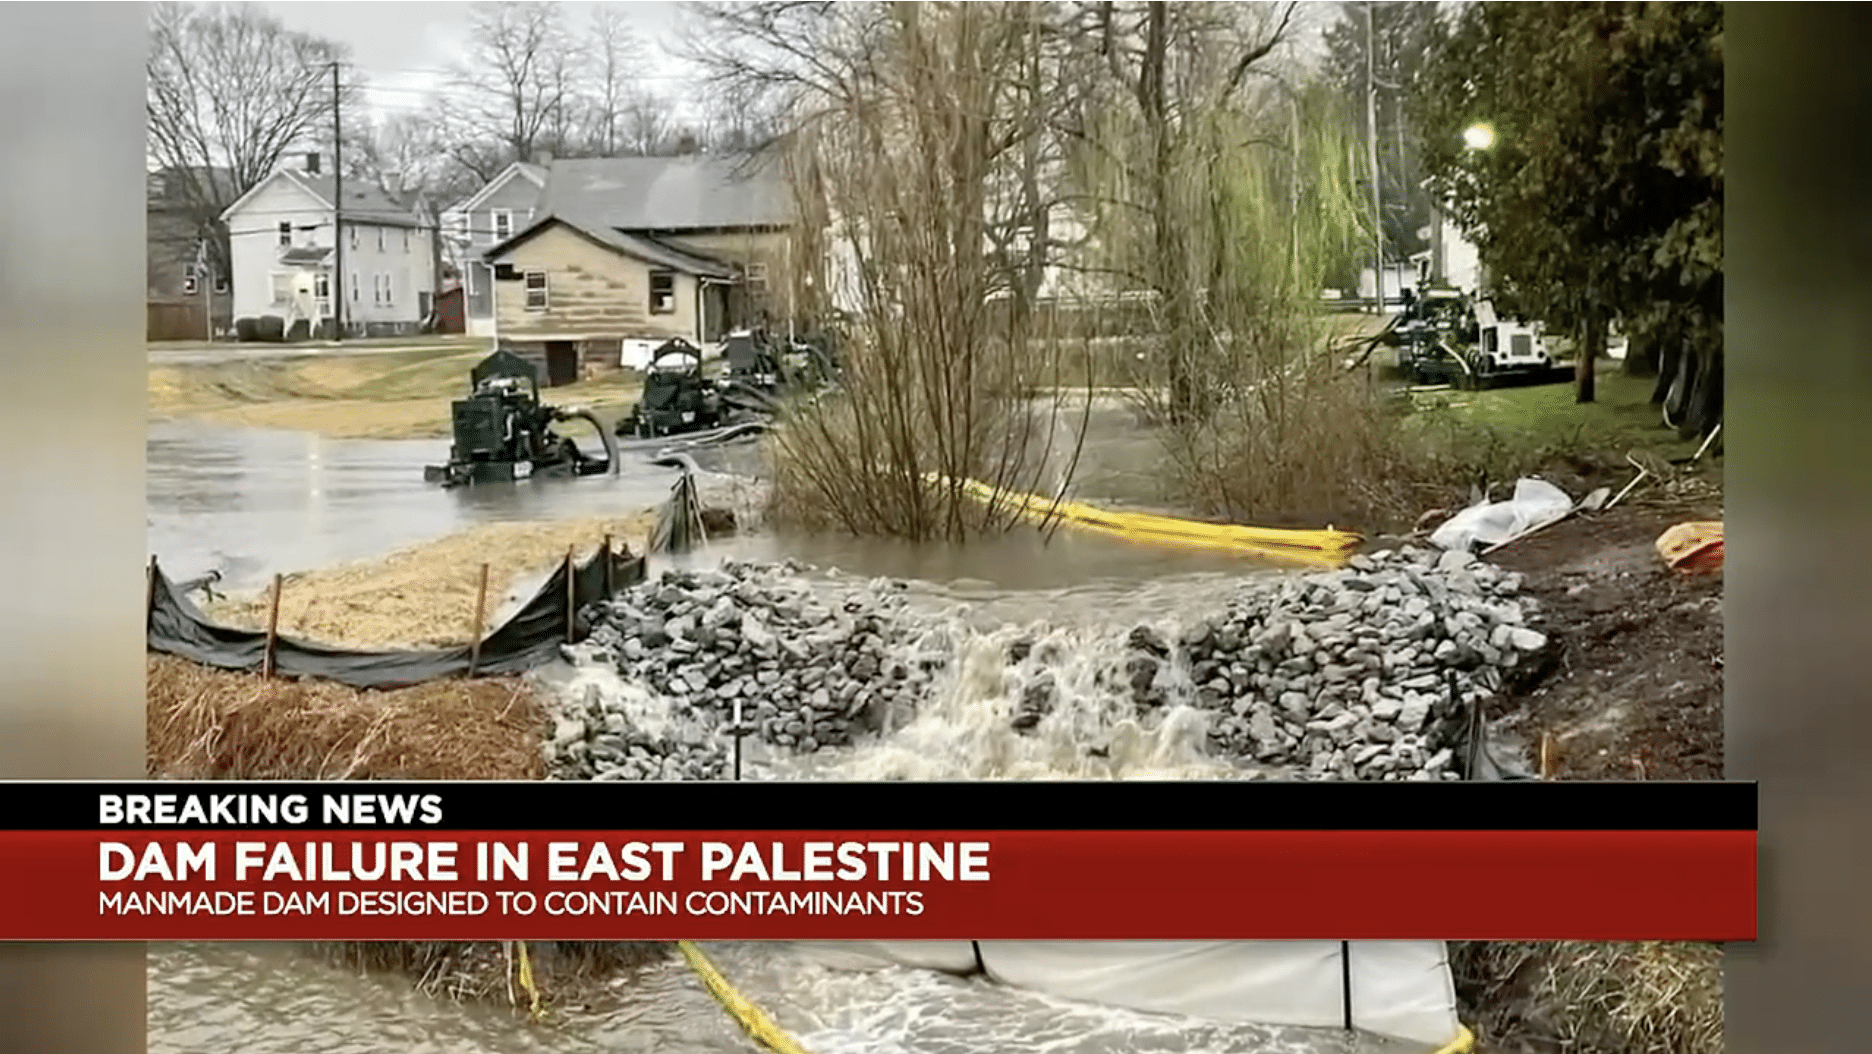 DEVELOPING: New level of fear as a makeshift dam has been breached in East Palestine